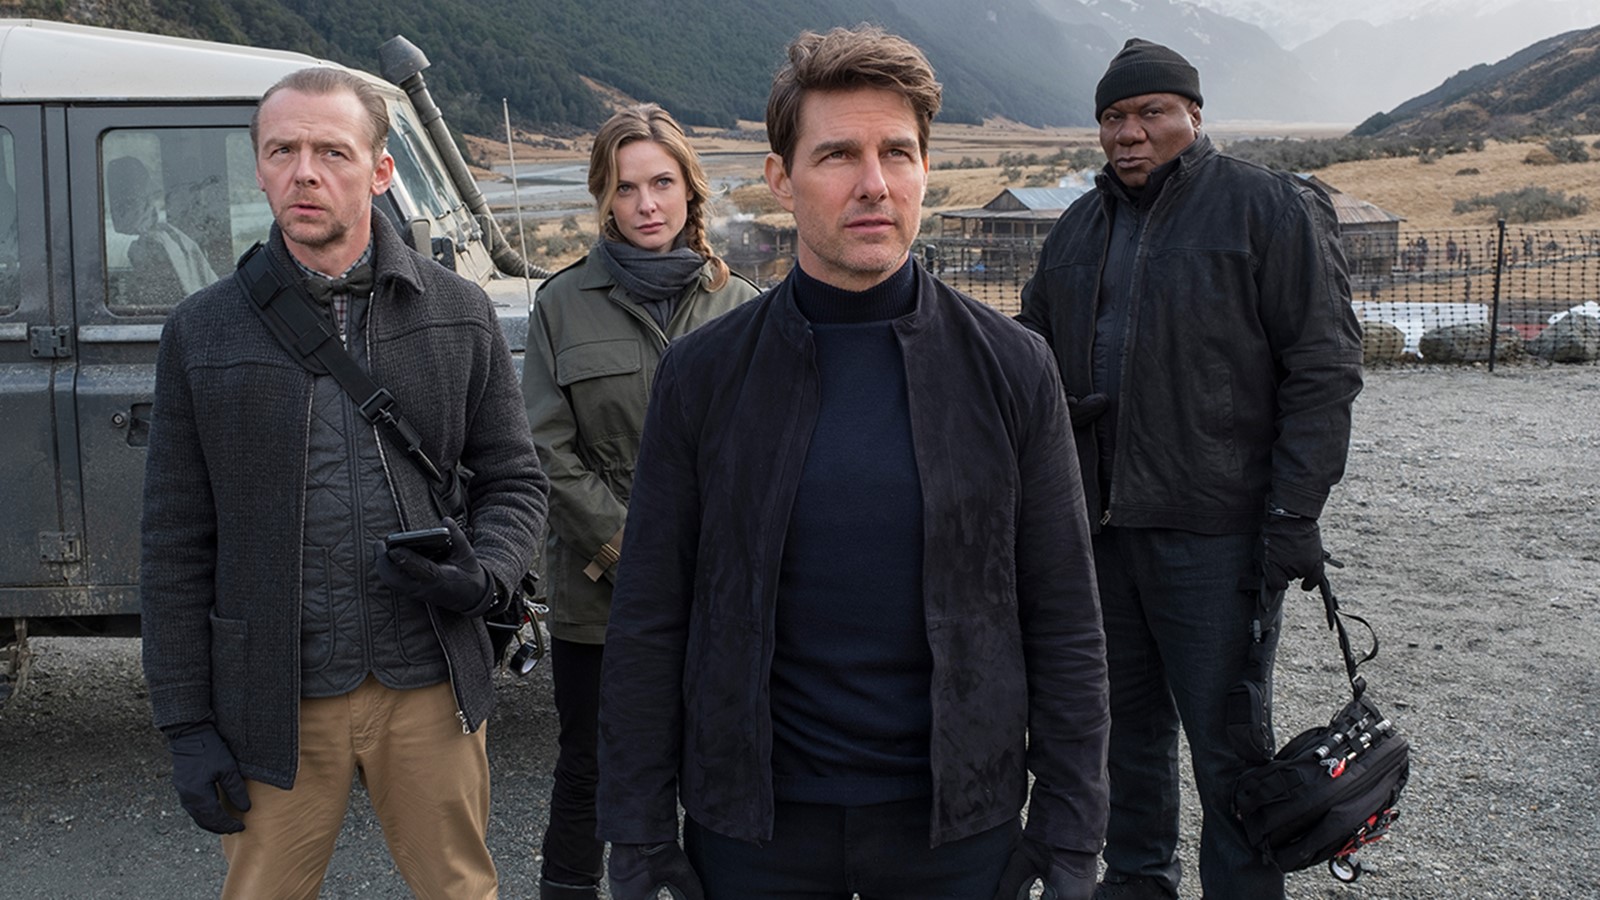 Mission: Impossible 7, the director anticipates a scene that will see Tom Cruise stunting on a train